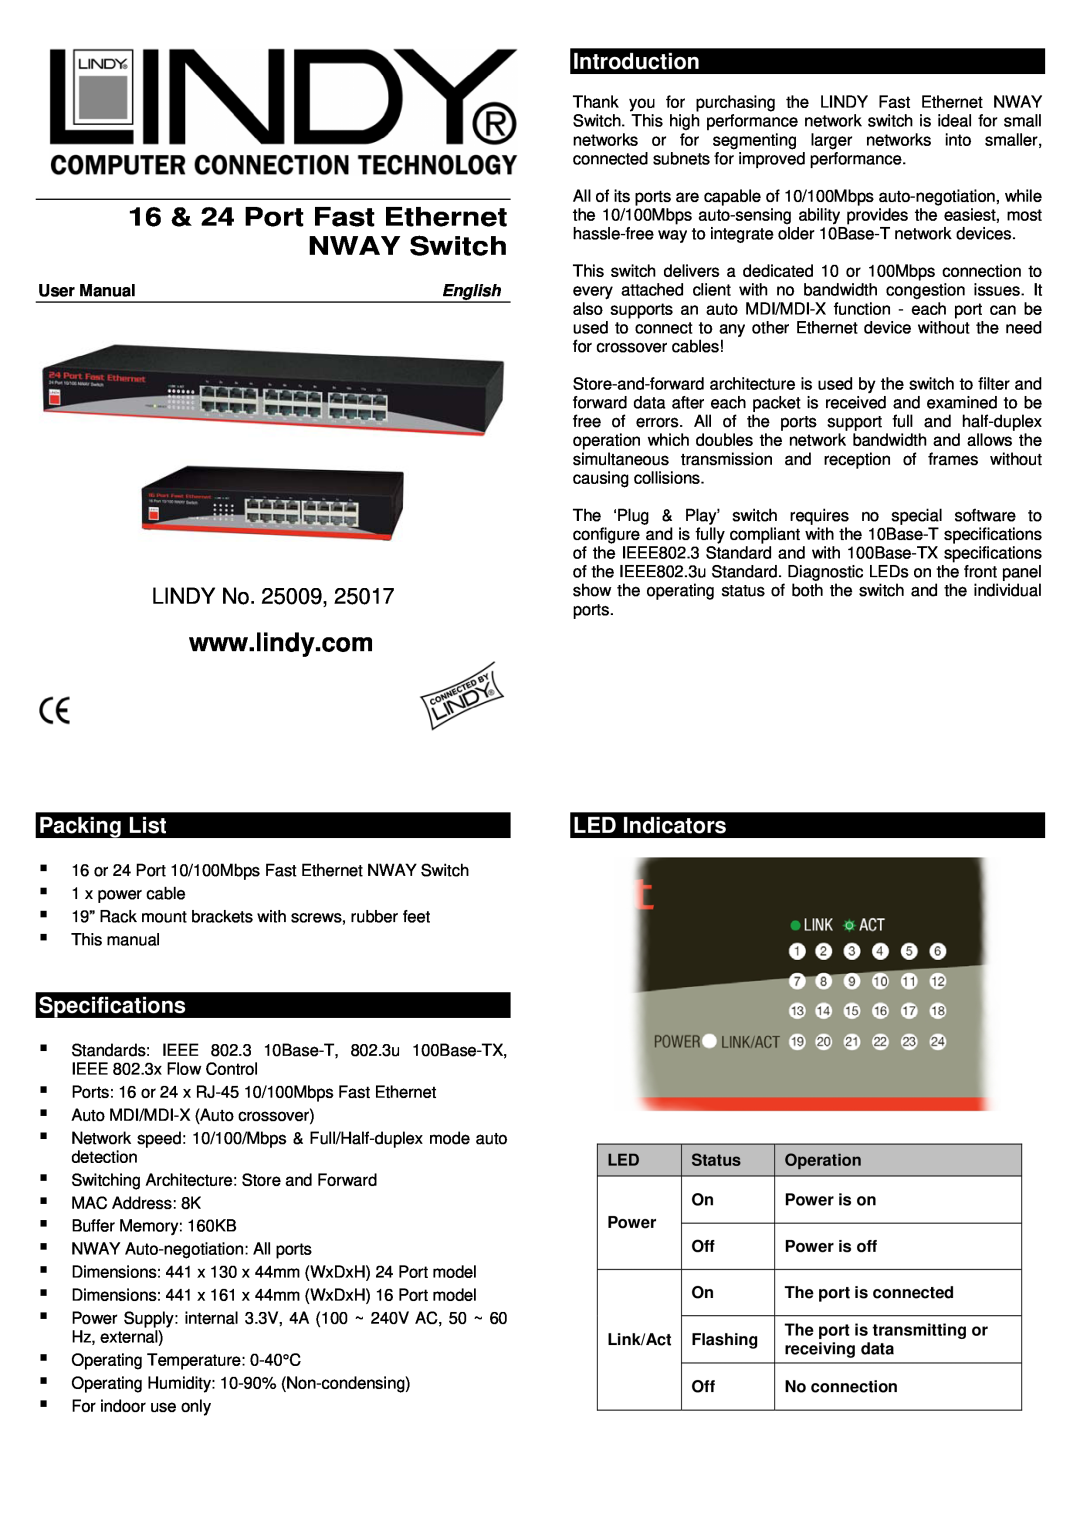 Lindy user manual Packing List, Specifications, Introduction, LED Indicators, User Manual, Status, LINDY No. 25009 